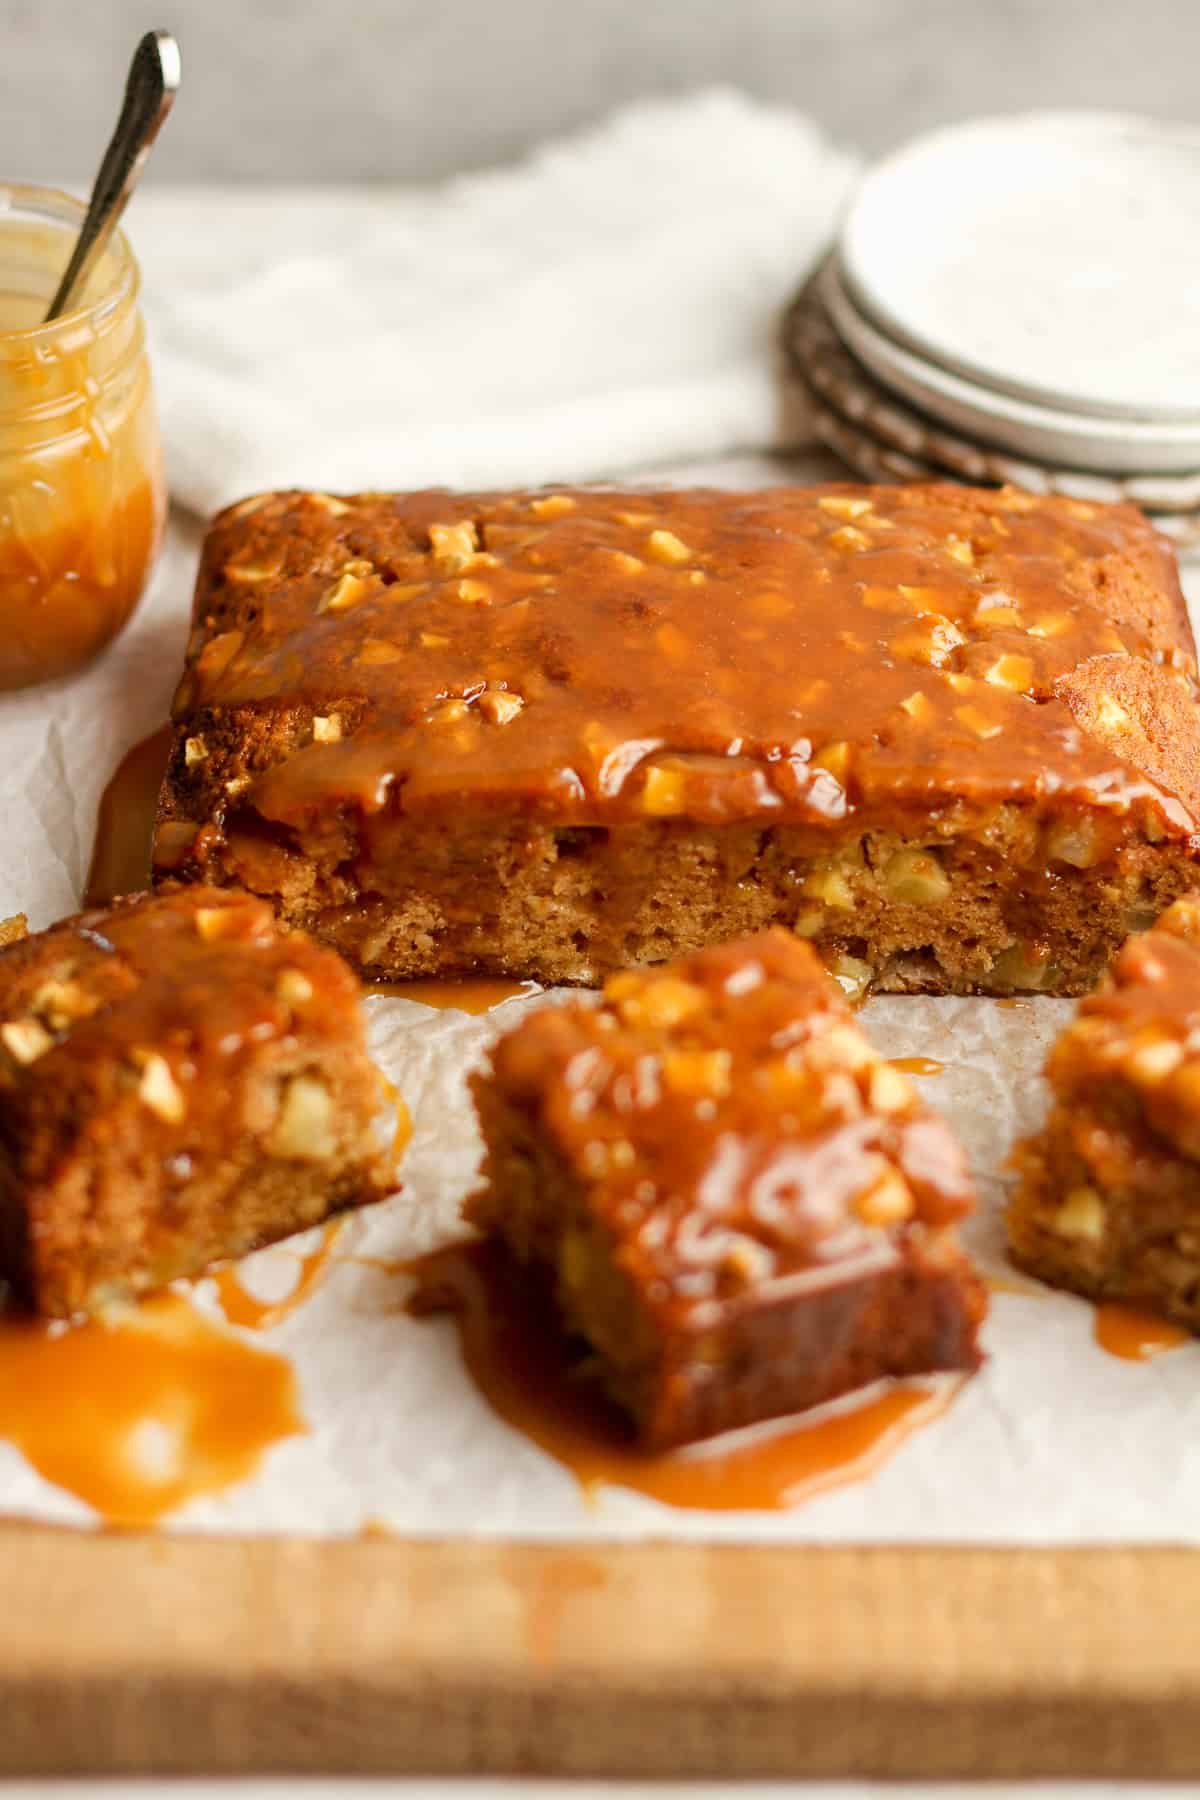 Side view of a apple cake with some pieces with caramel sauce.